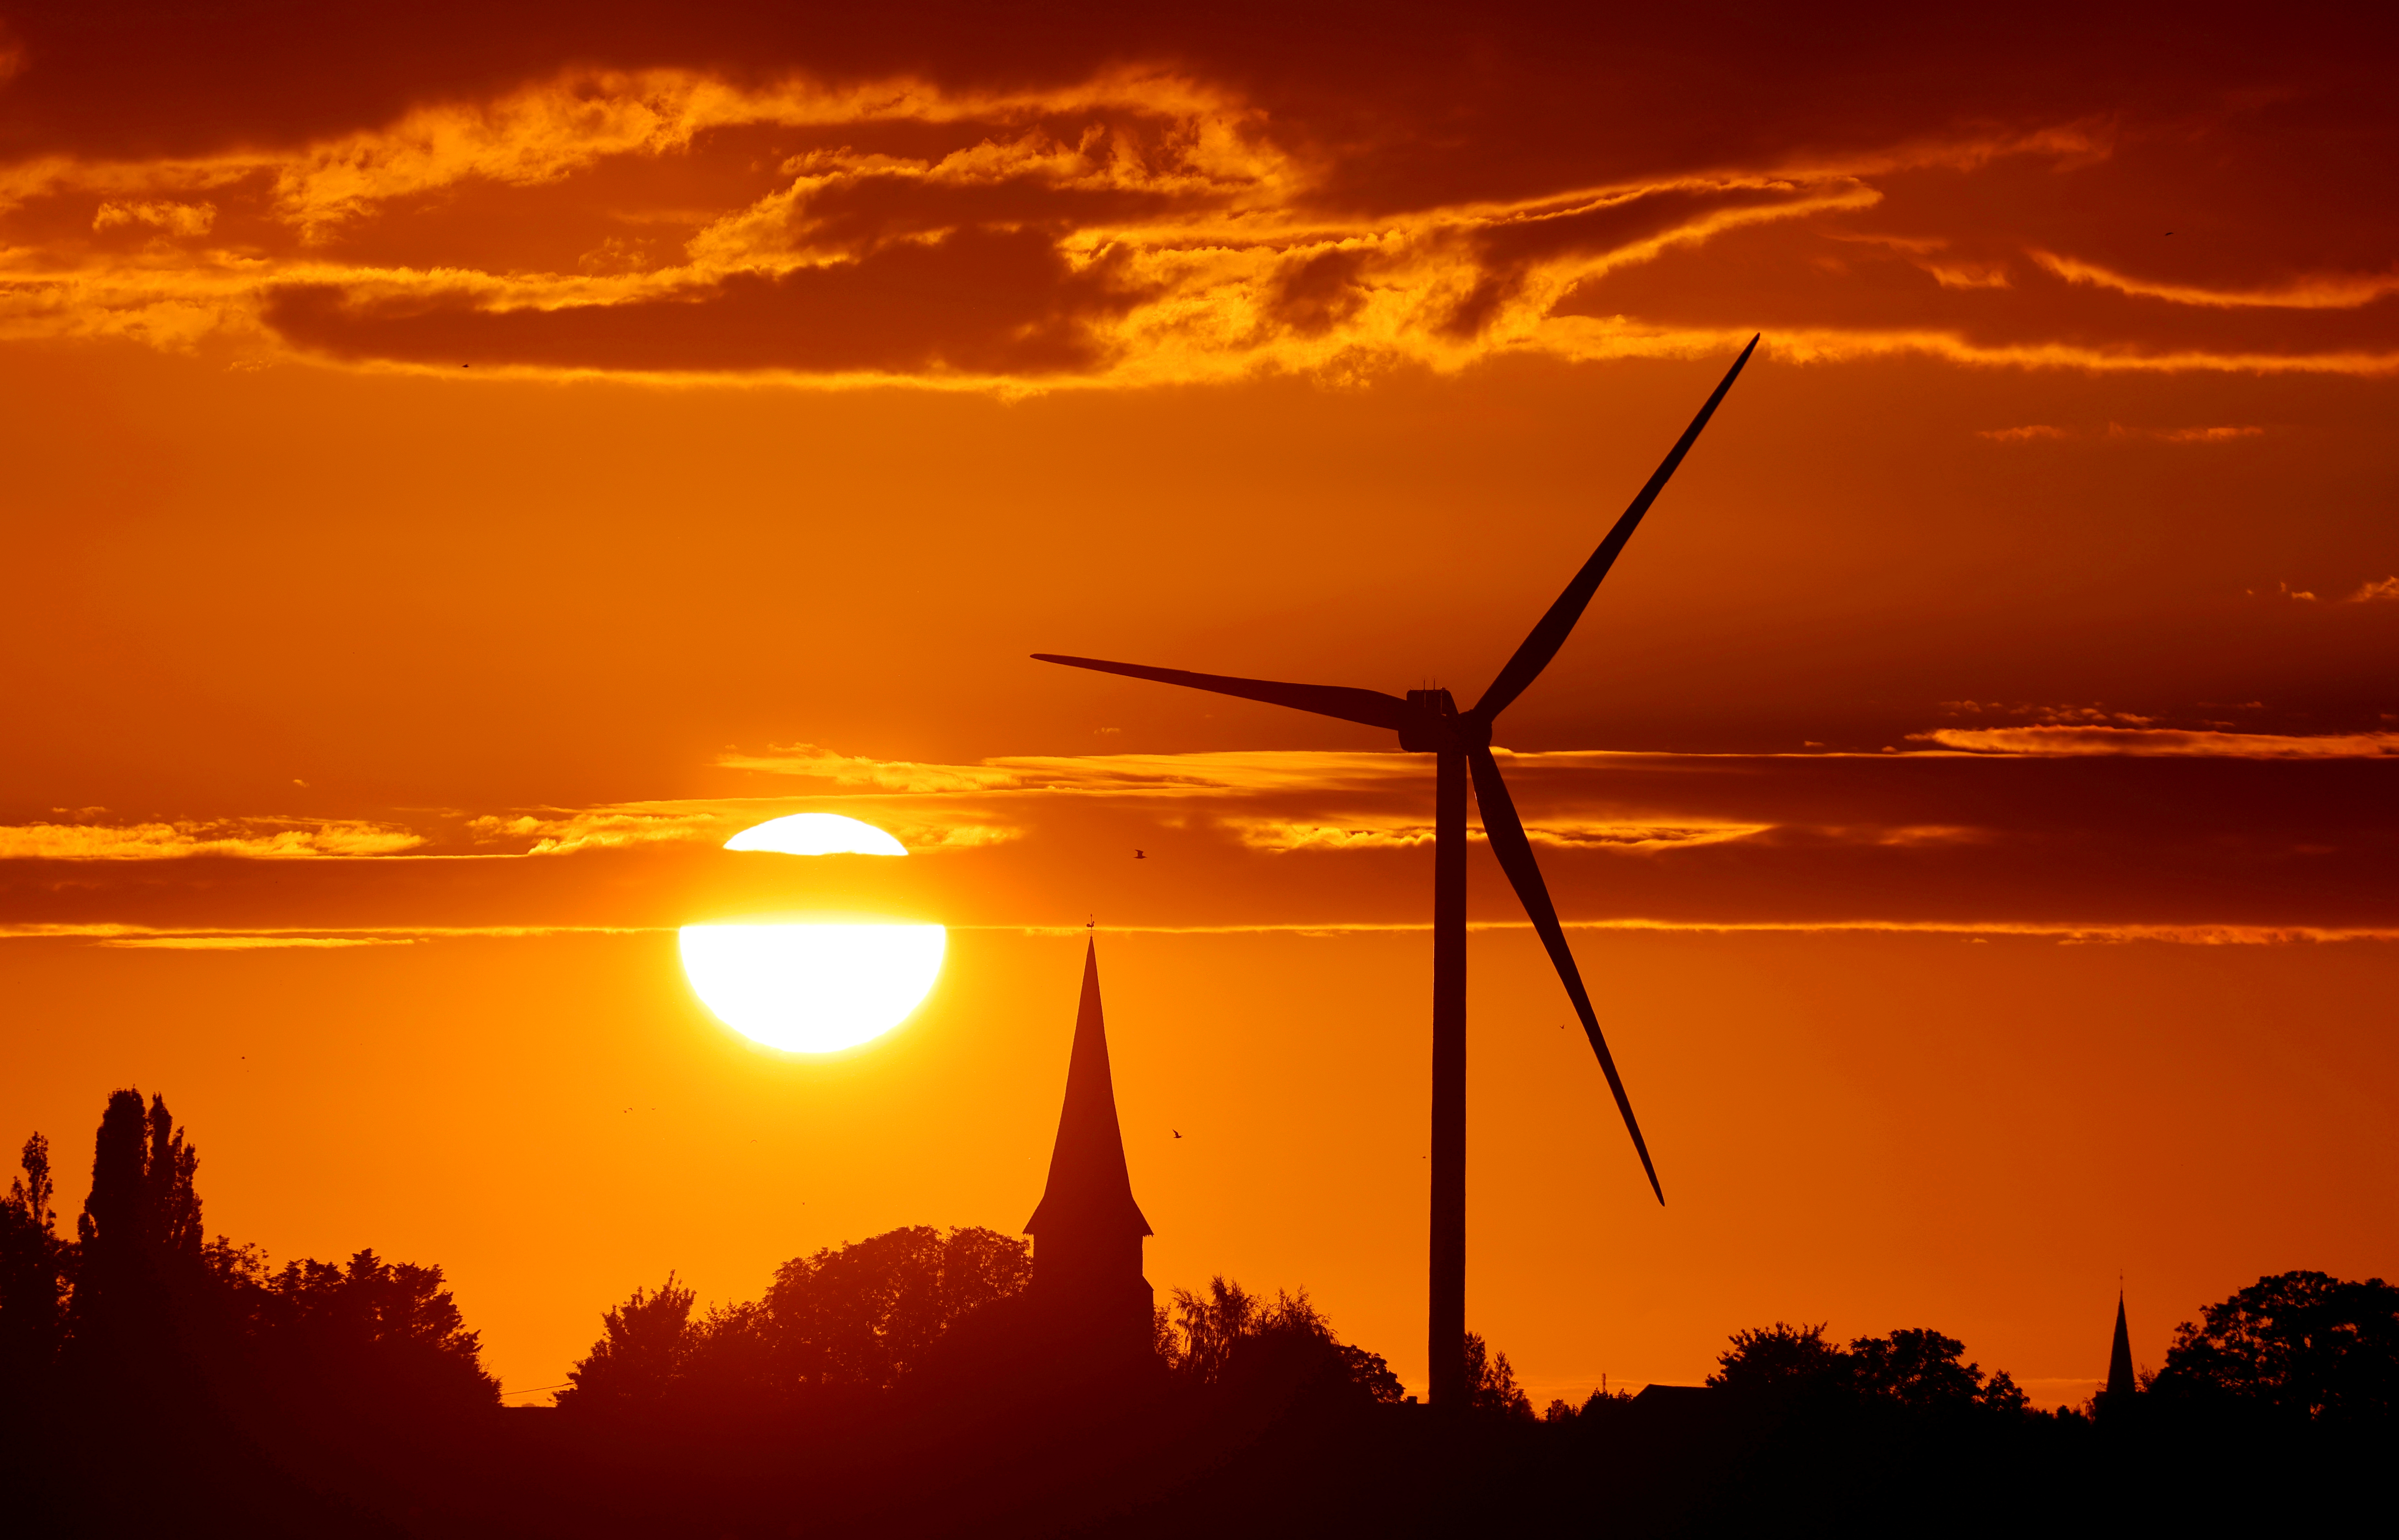 FILE PHOTO: A power-generating windmill turbine is pictured during sunset at a renewable energy park in Ecoust-Saint-Mein, France